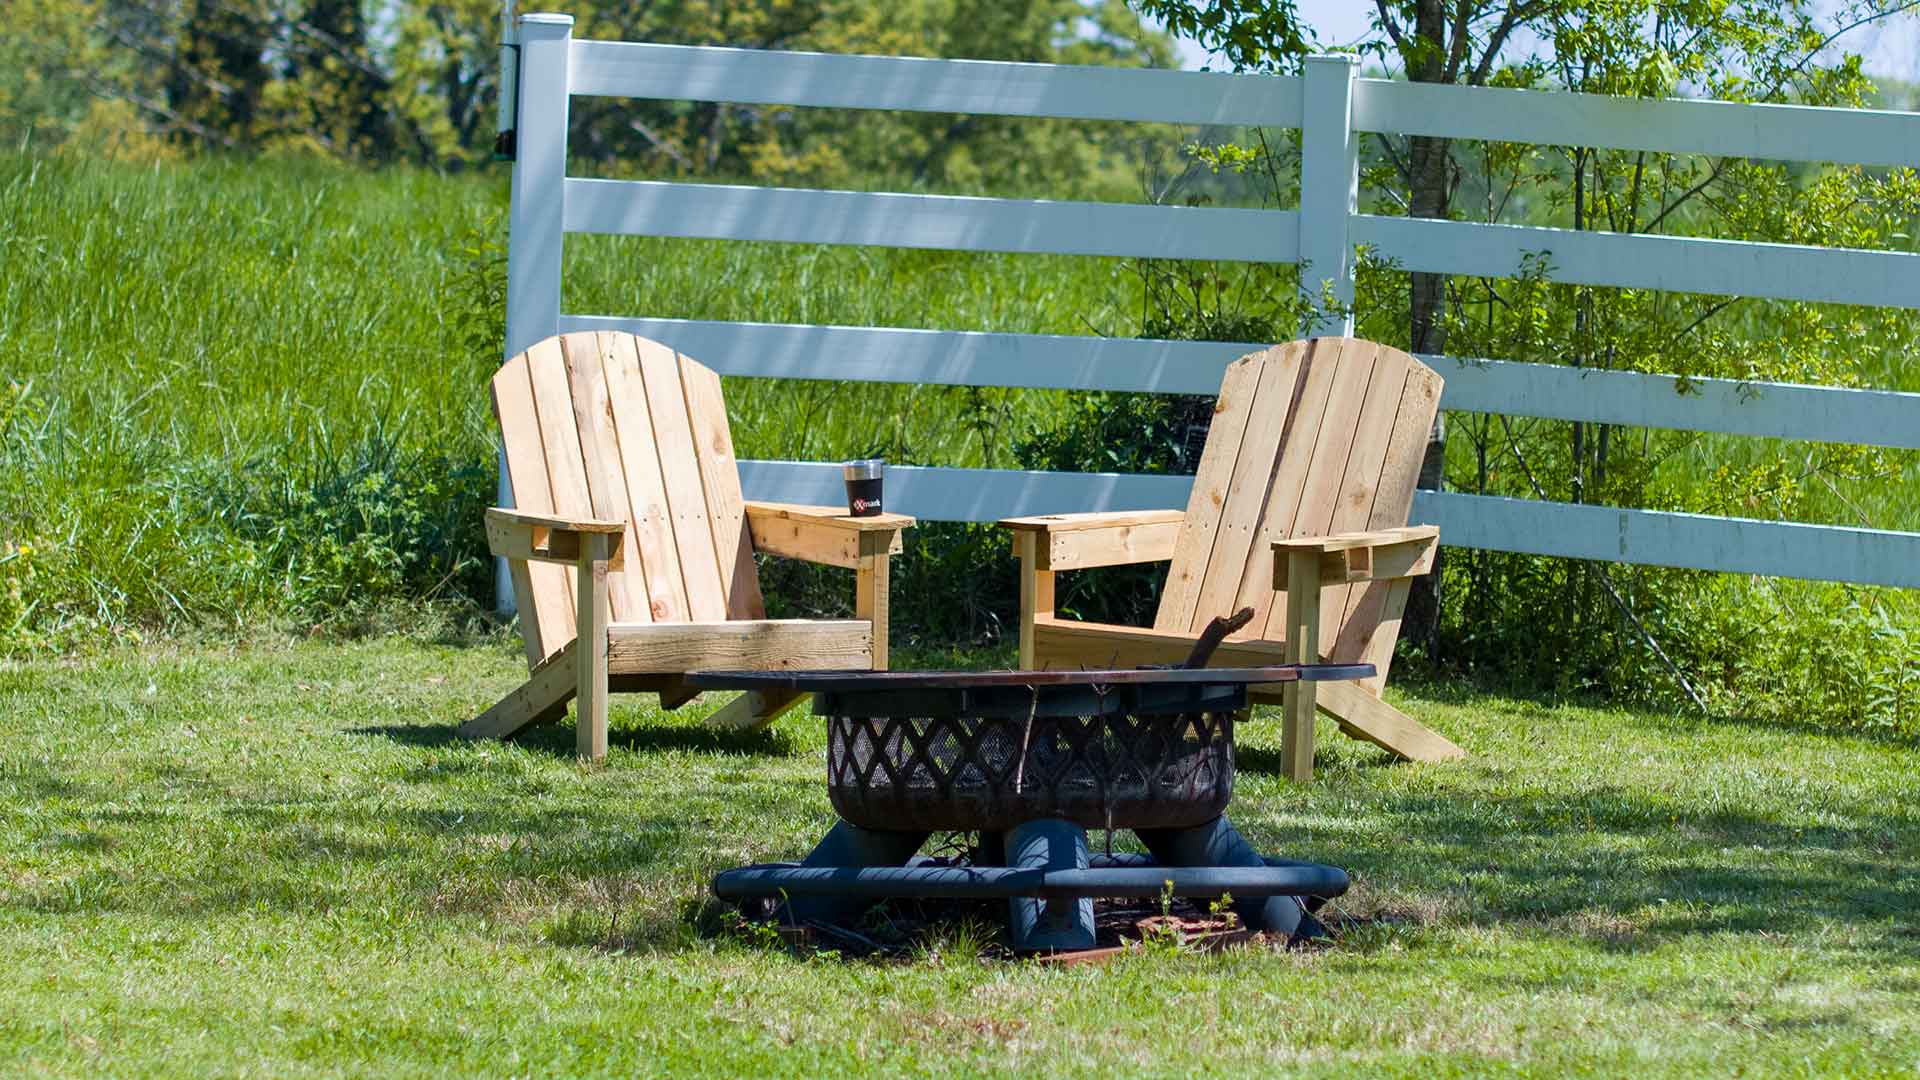 Done-in-a-Weekend DIY Adirondack Chairs build project